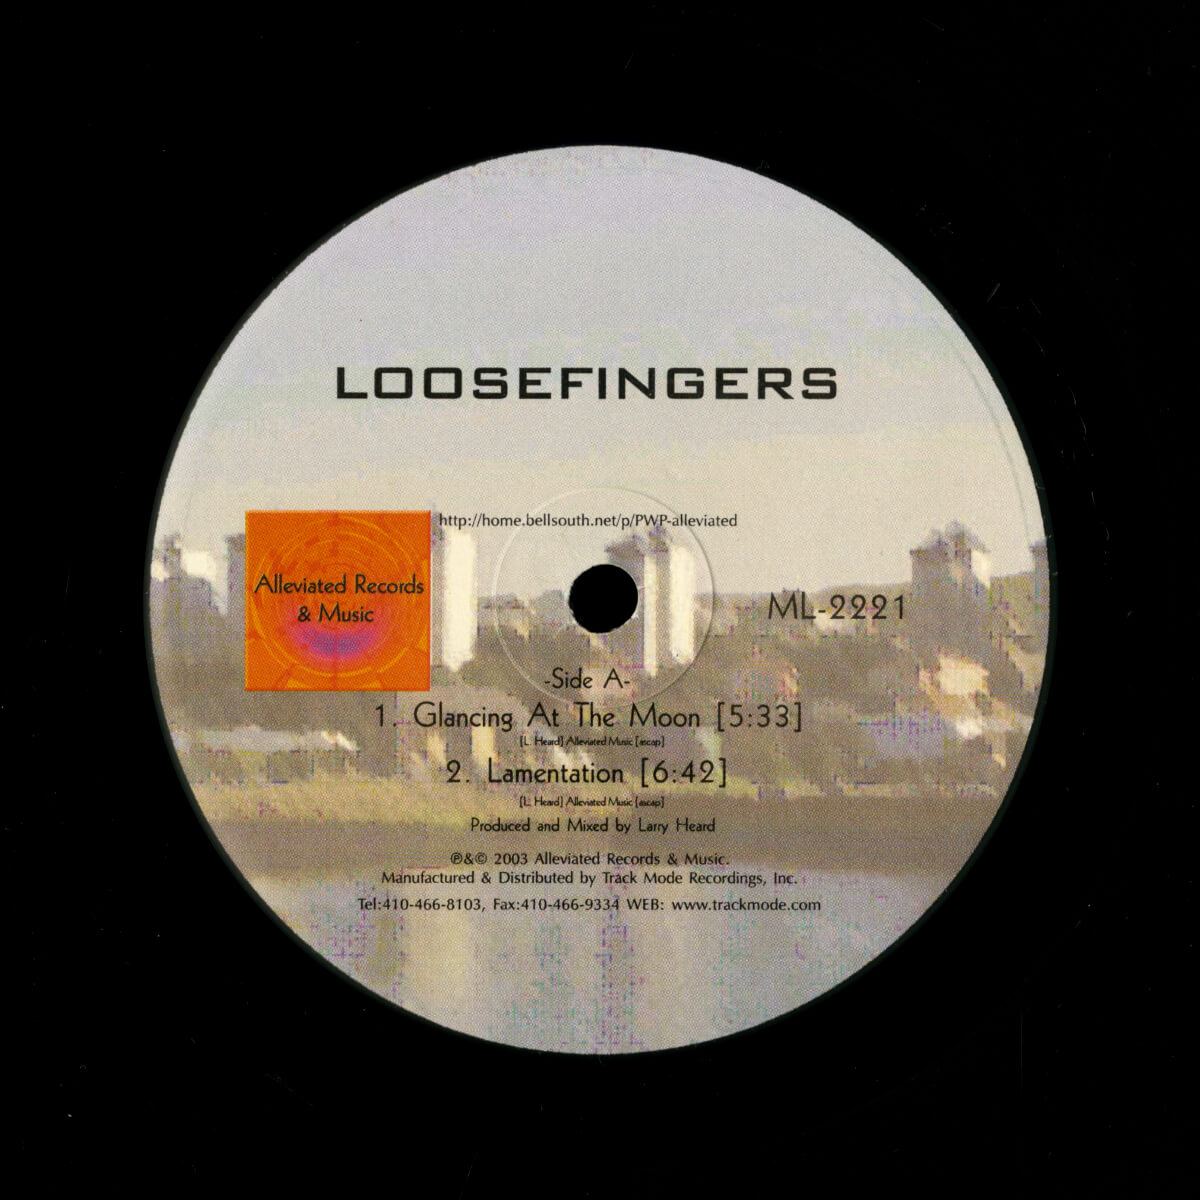 Loosefingers – Glancing At The Moon